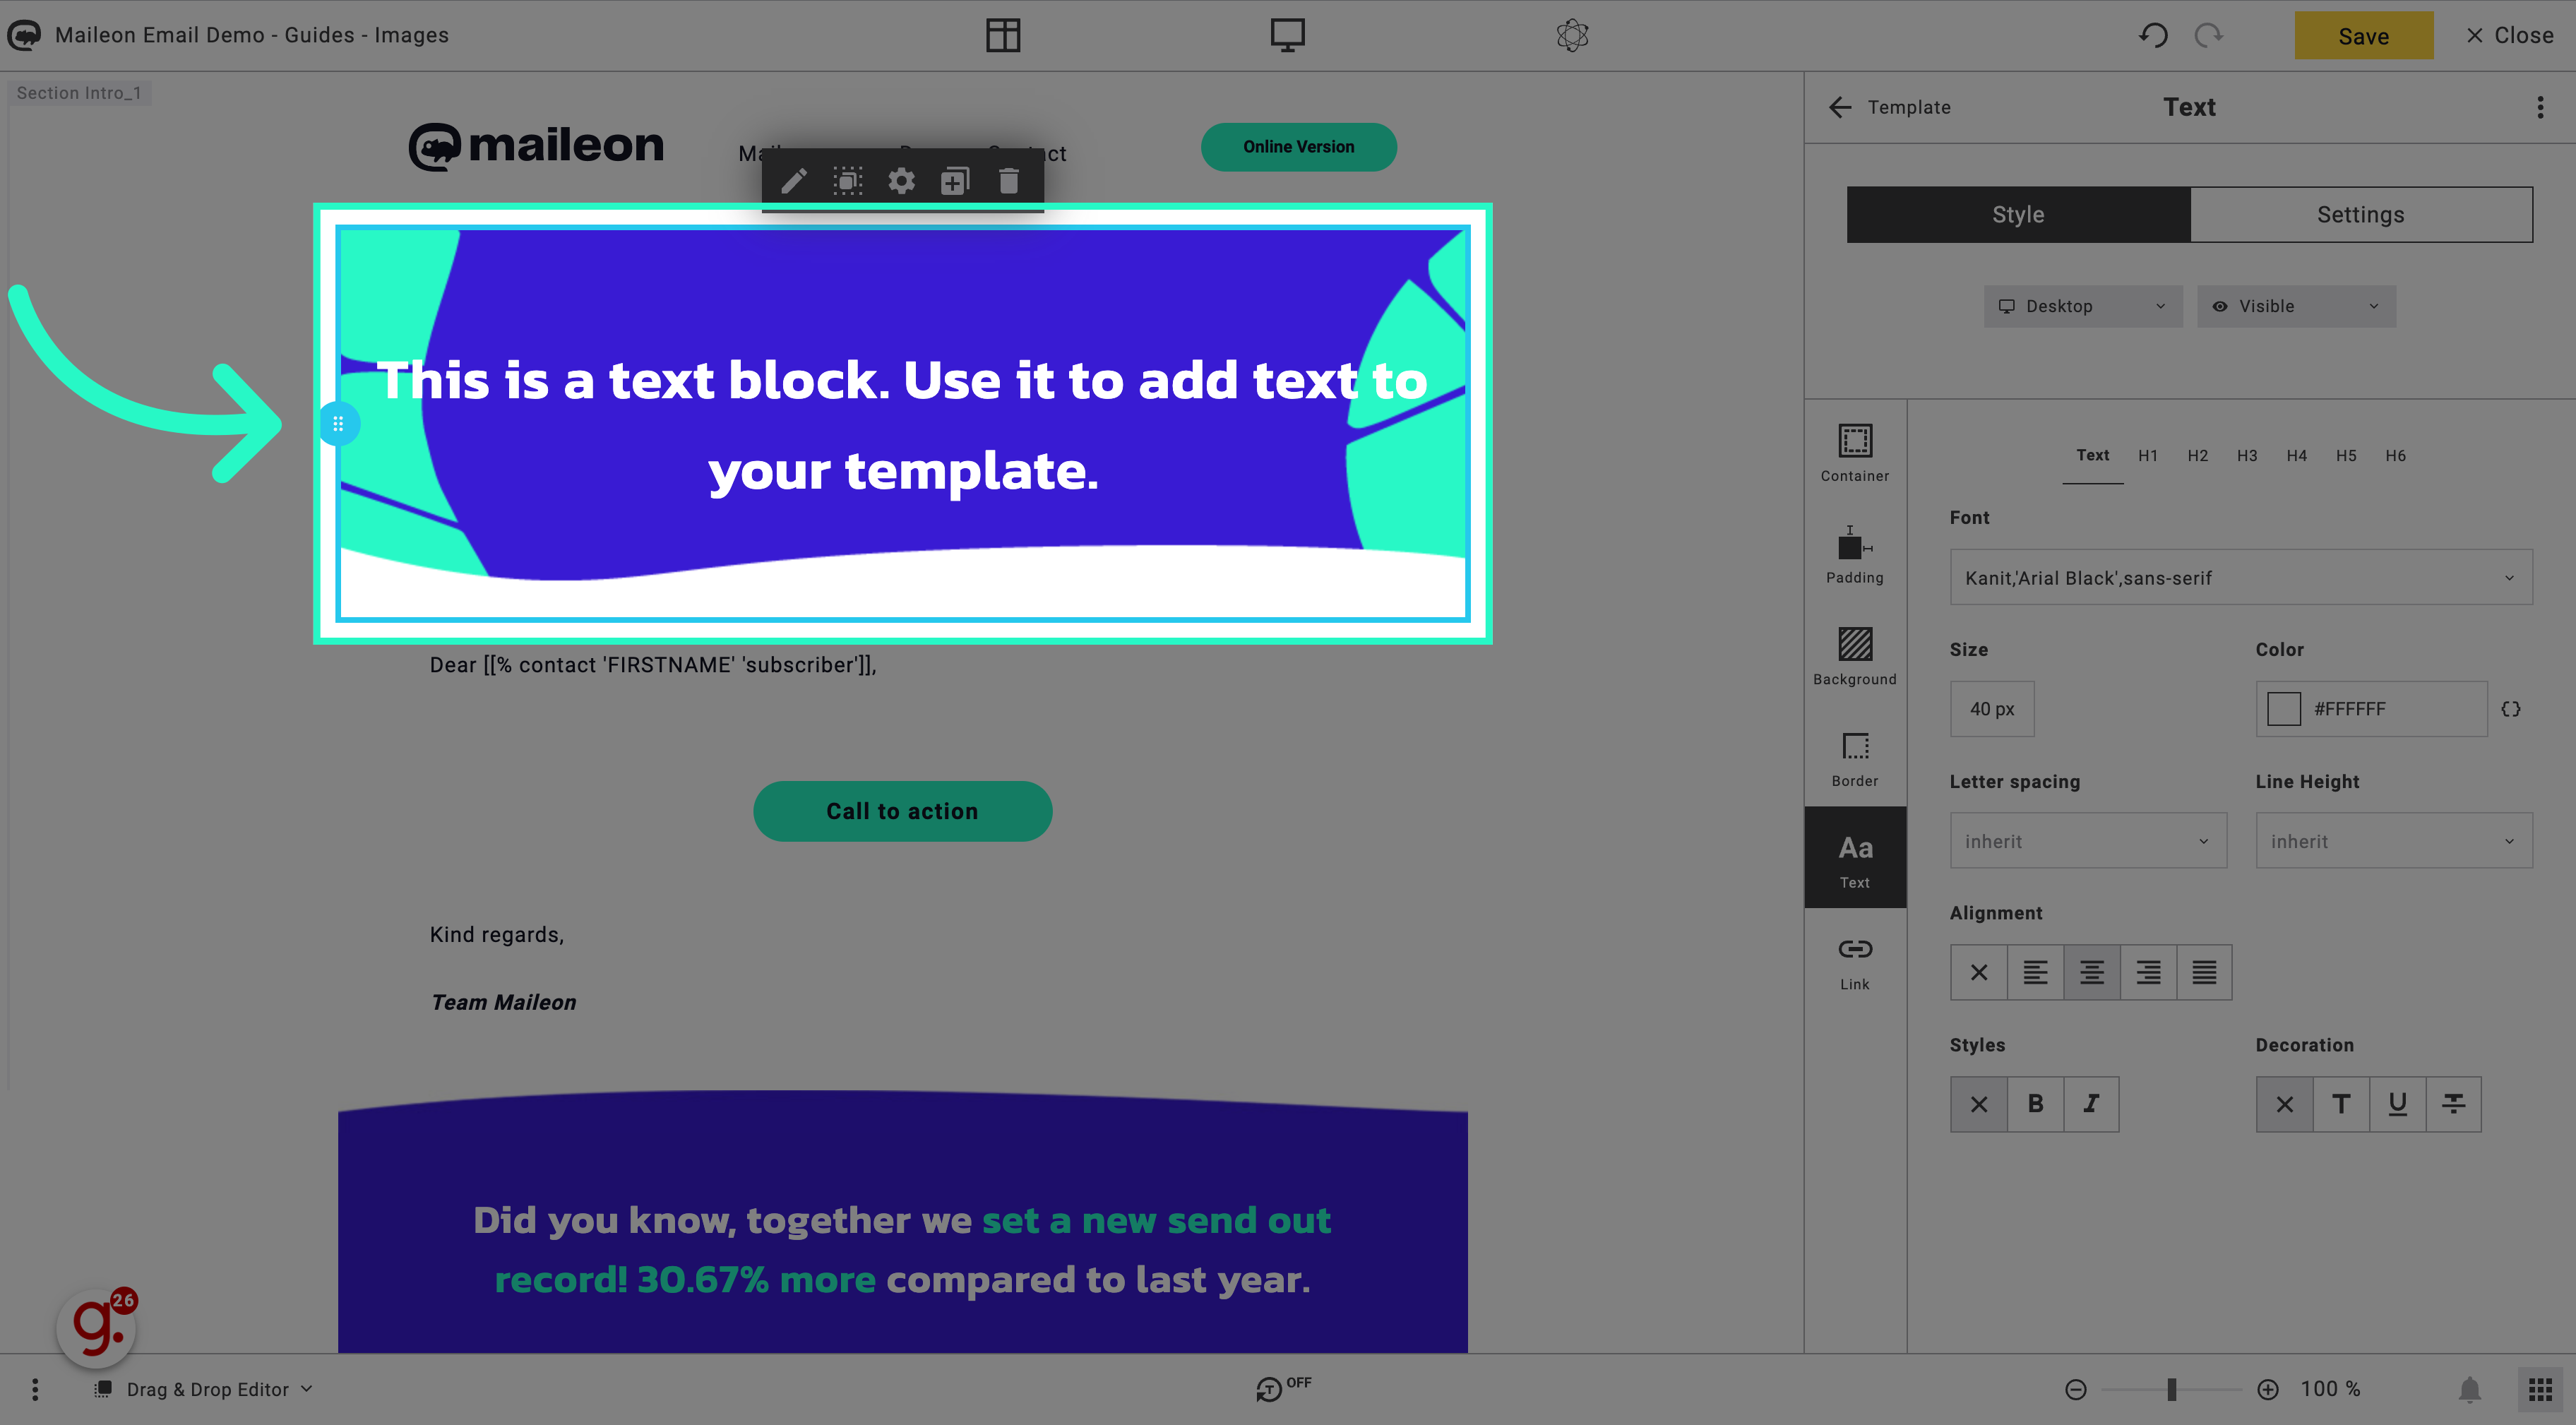 Click 'This is a text block. Use it to add text to your template.'